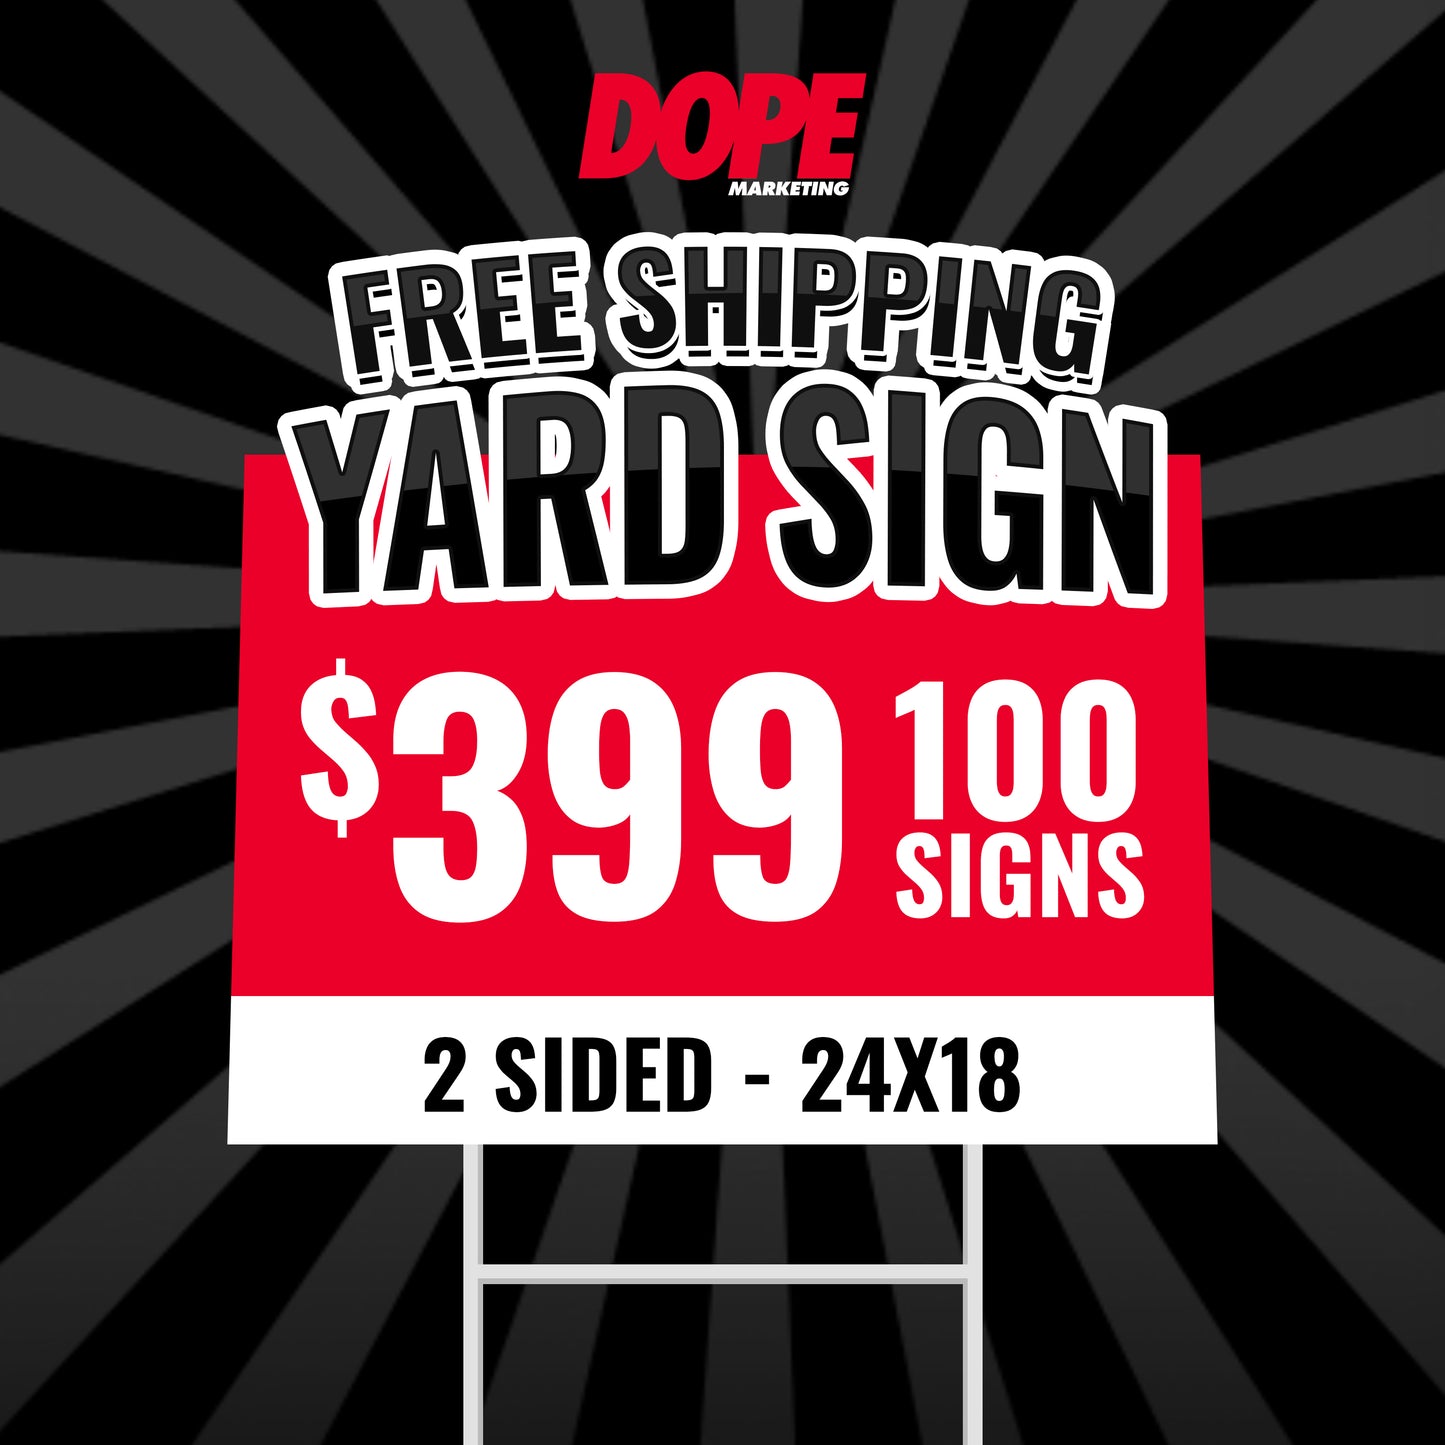 Yard Sign SALE - Beat The Cold With These HOT Deals